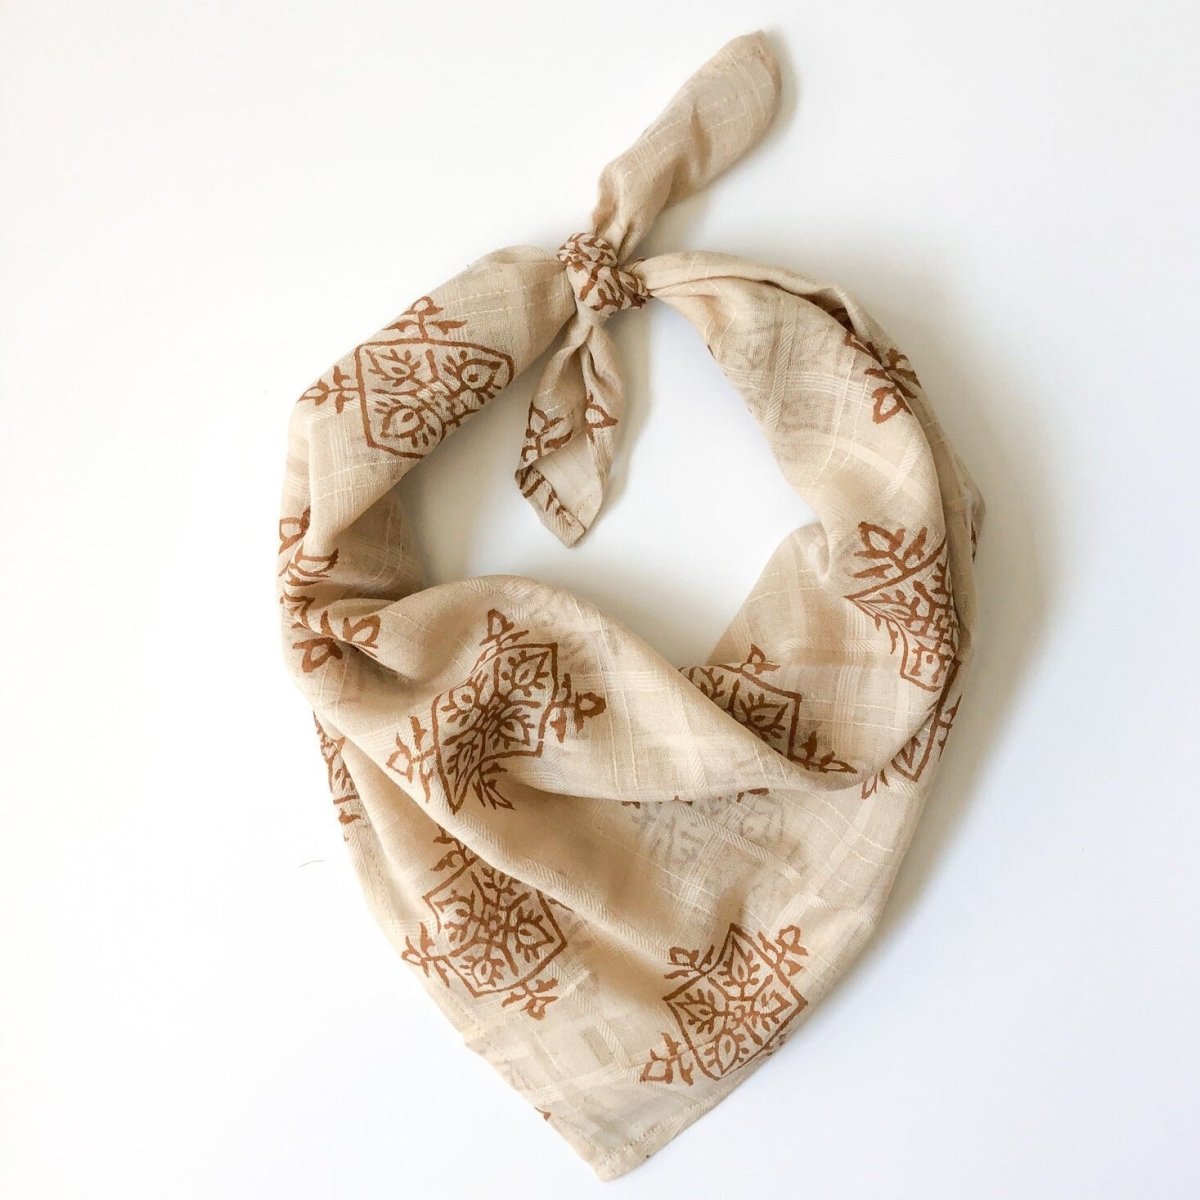 A golden brown and cream patterned bandana, folded over and tied in a knot. Block printed by hand, the Gold Compass Bandana from Maelu is designed in Portland, Oregon and handmade in India.